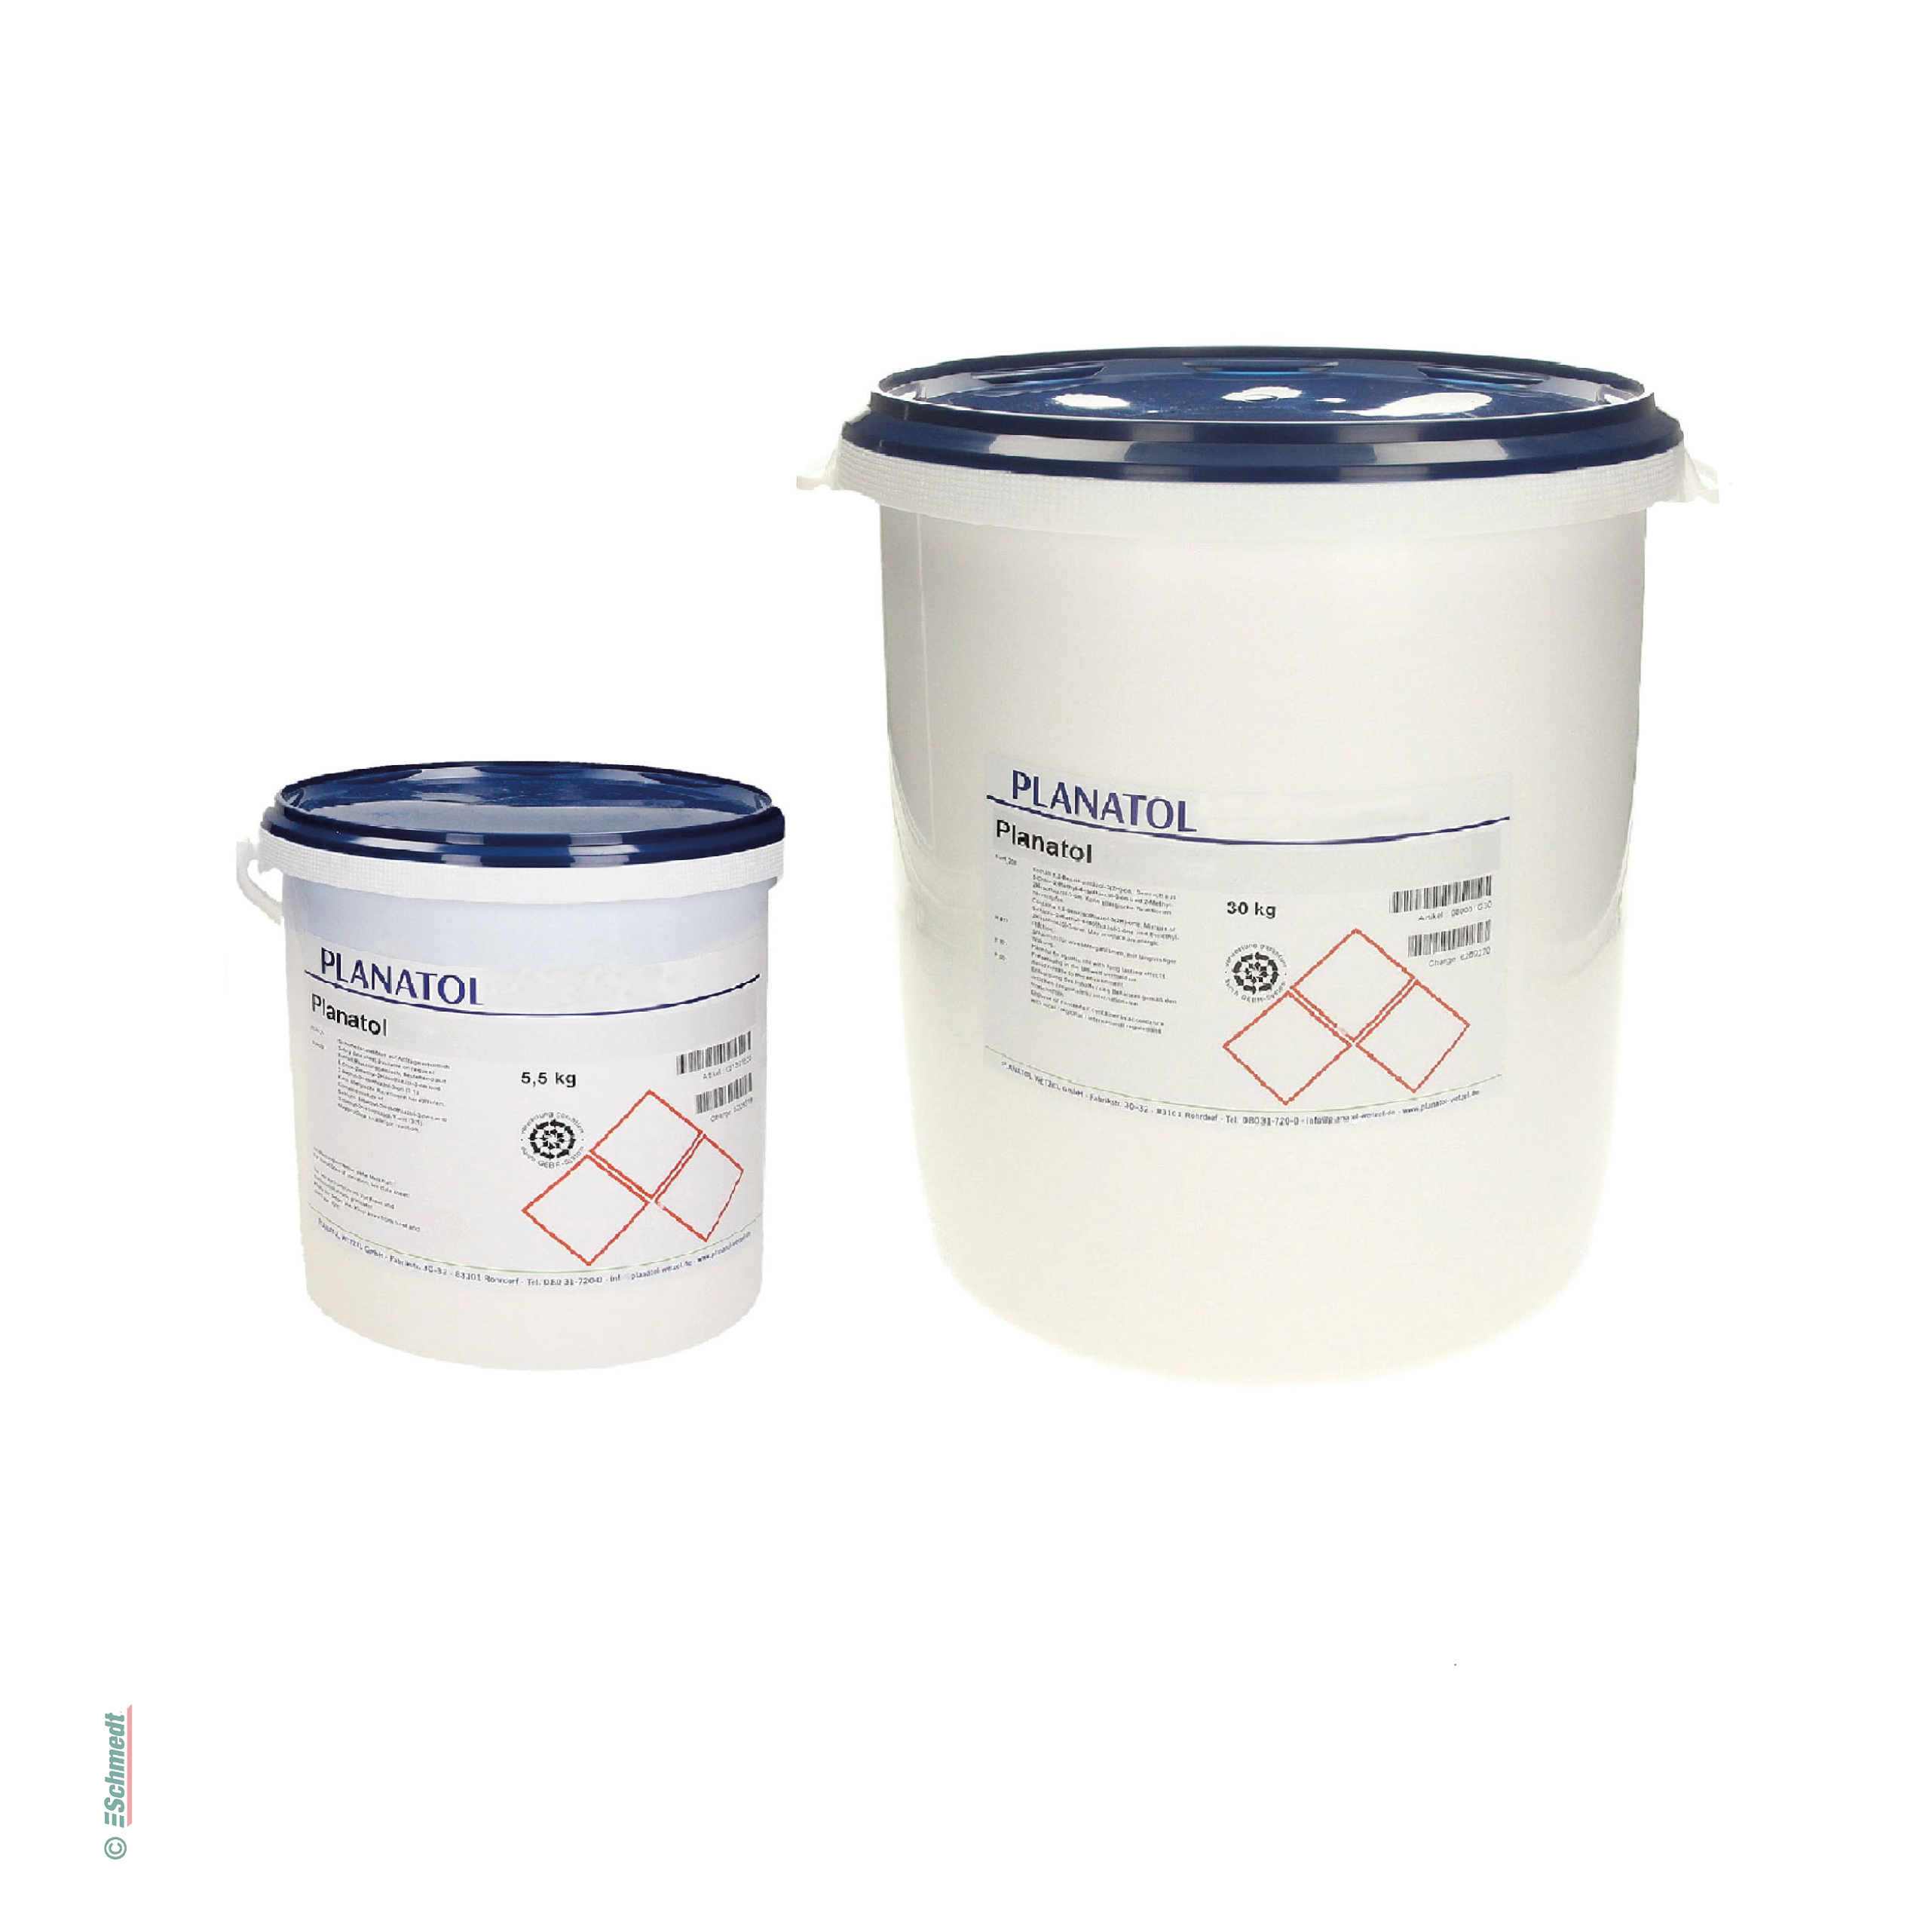 Planatol DK B 3040 - Contents Bucket / 5.5 kgs - for manual and automatic fanbinding of heavily coated papers used in digital printing...